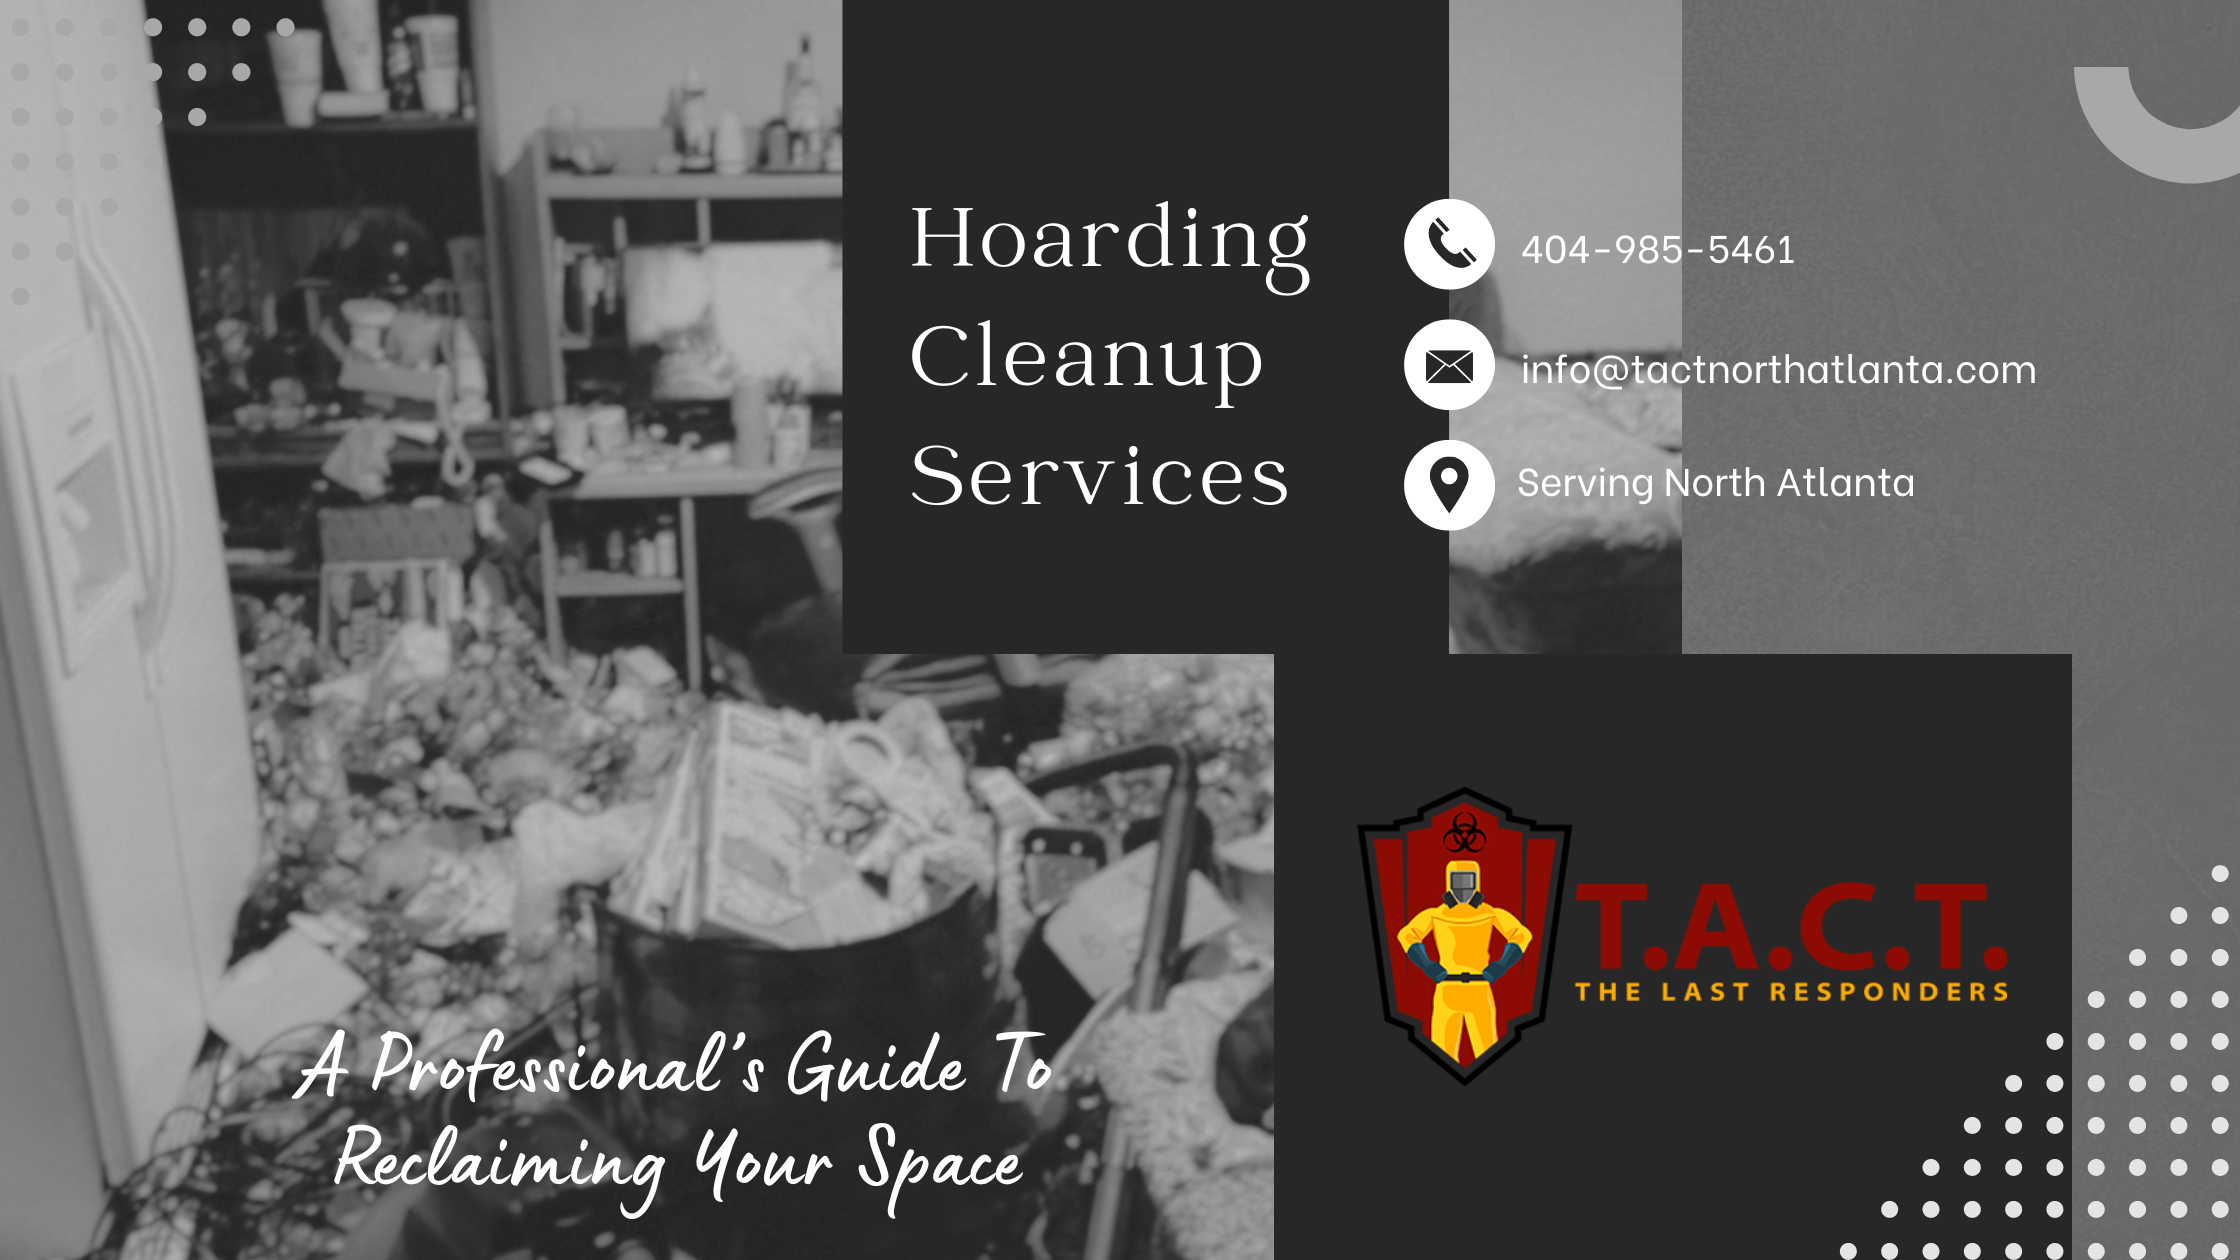 Hoarding Cleanup Services in North Atlanta: A Professional's Guide to Reclaiming Your Space